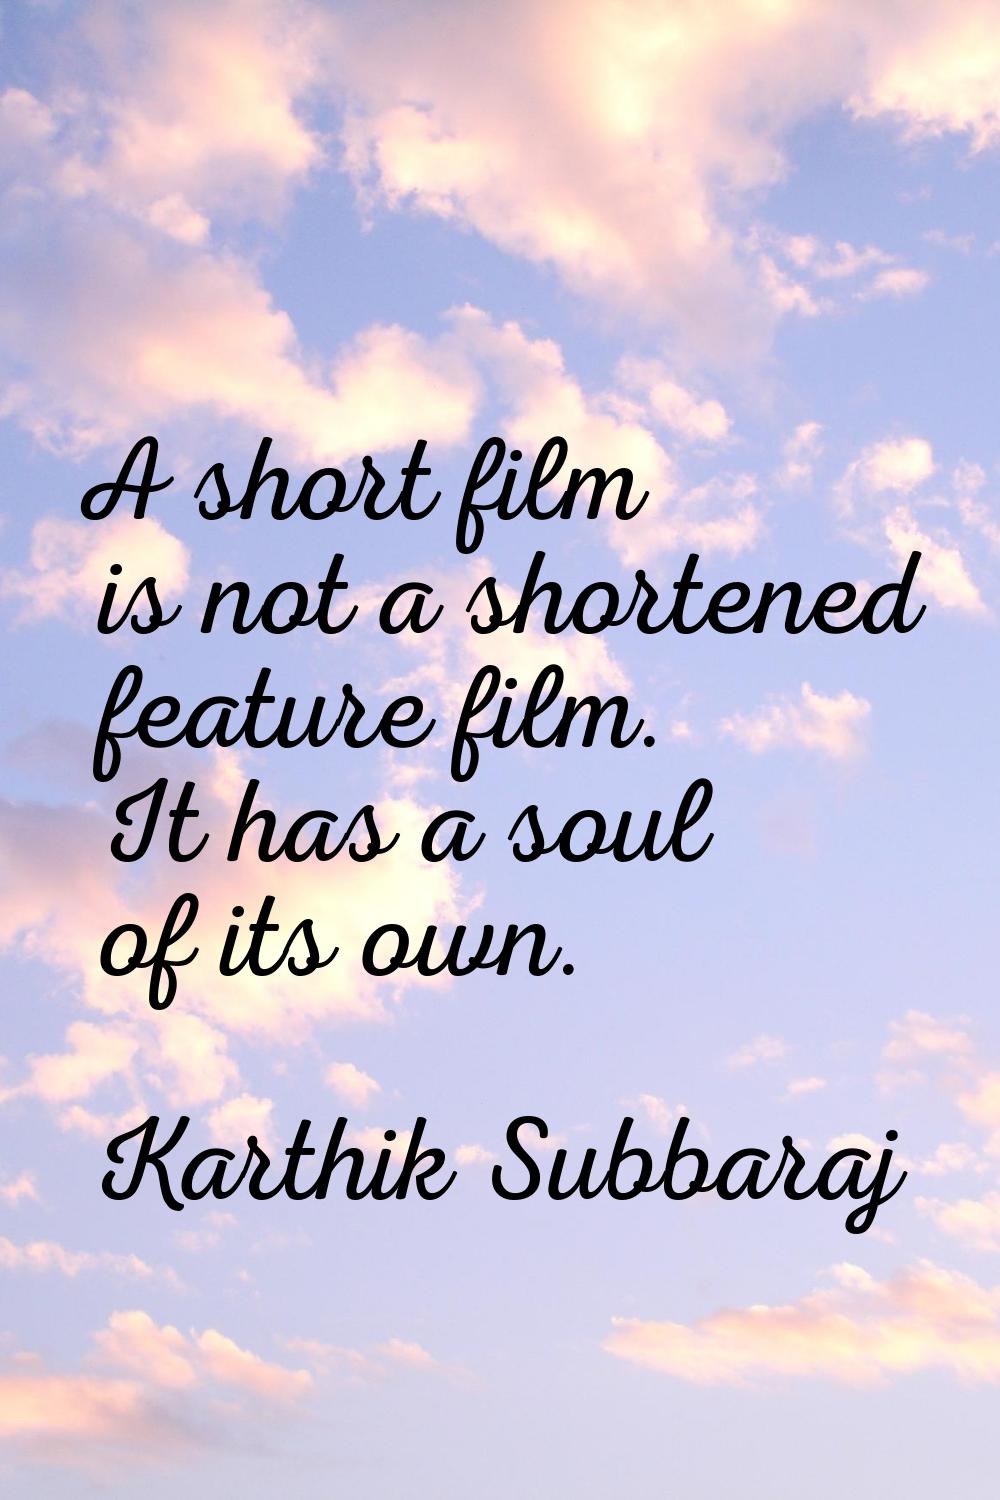 A short film is not a shortened feature film. It has a soul of its own.